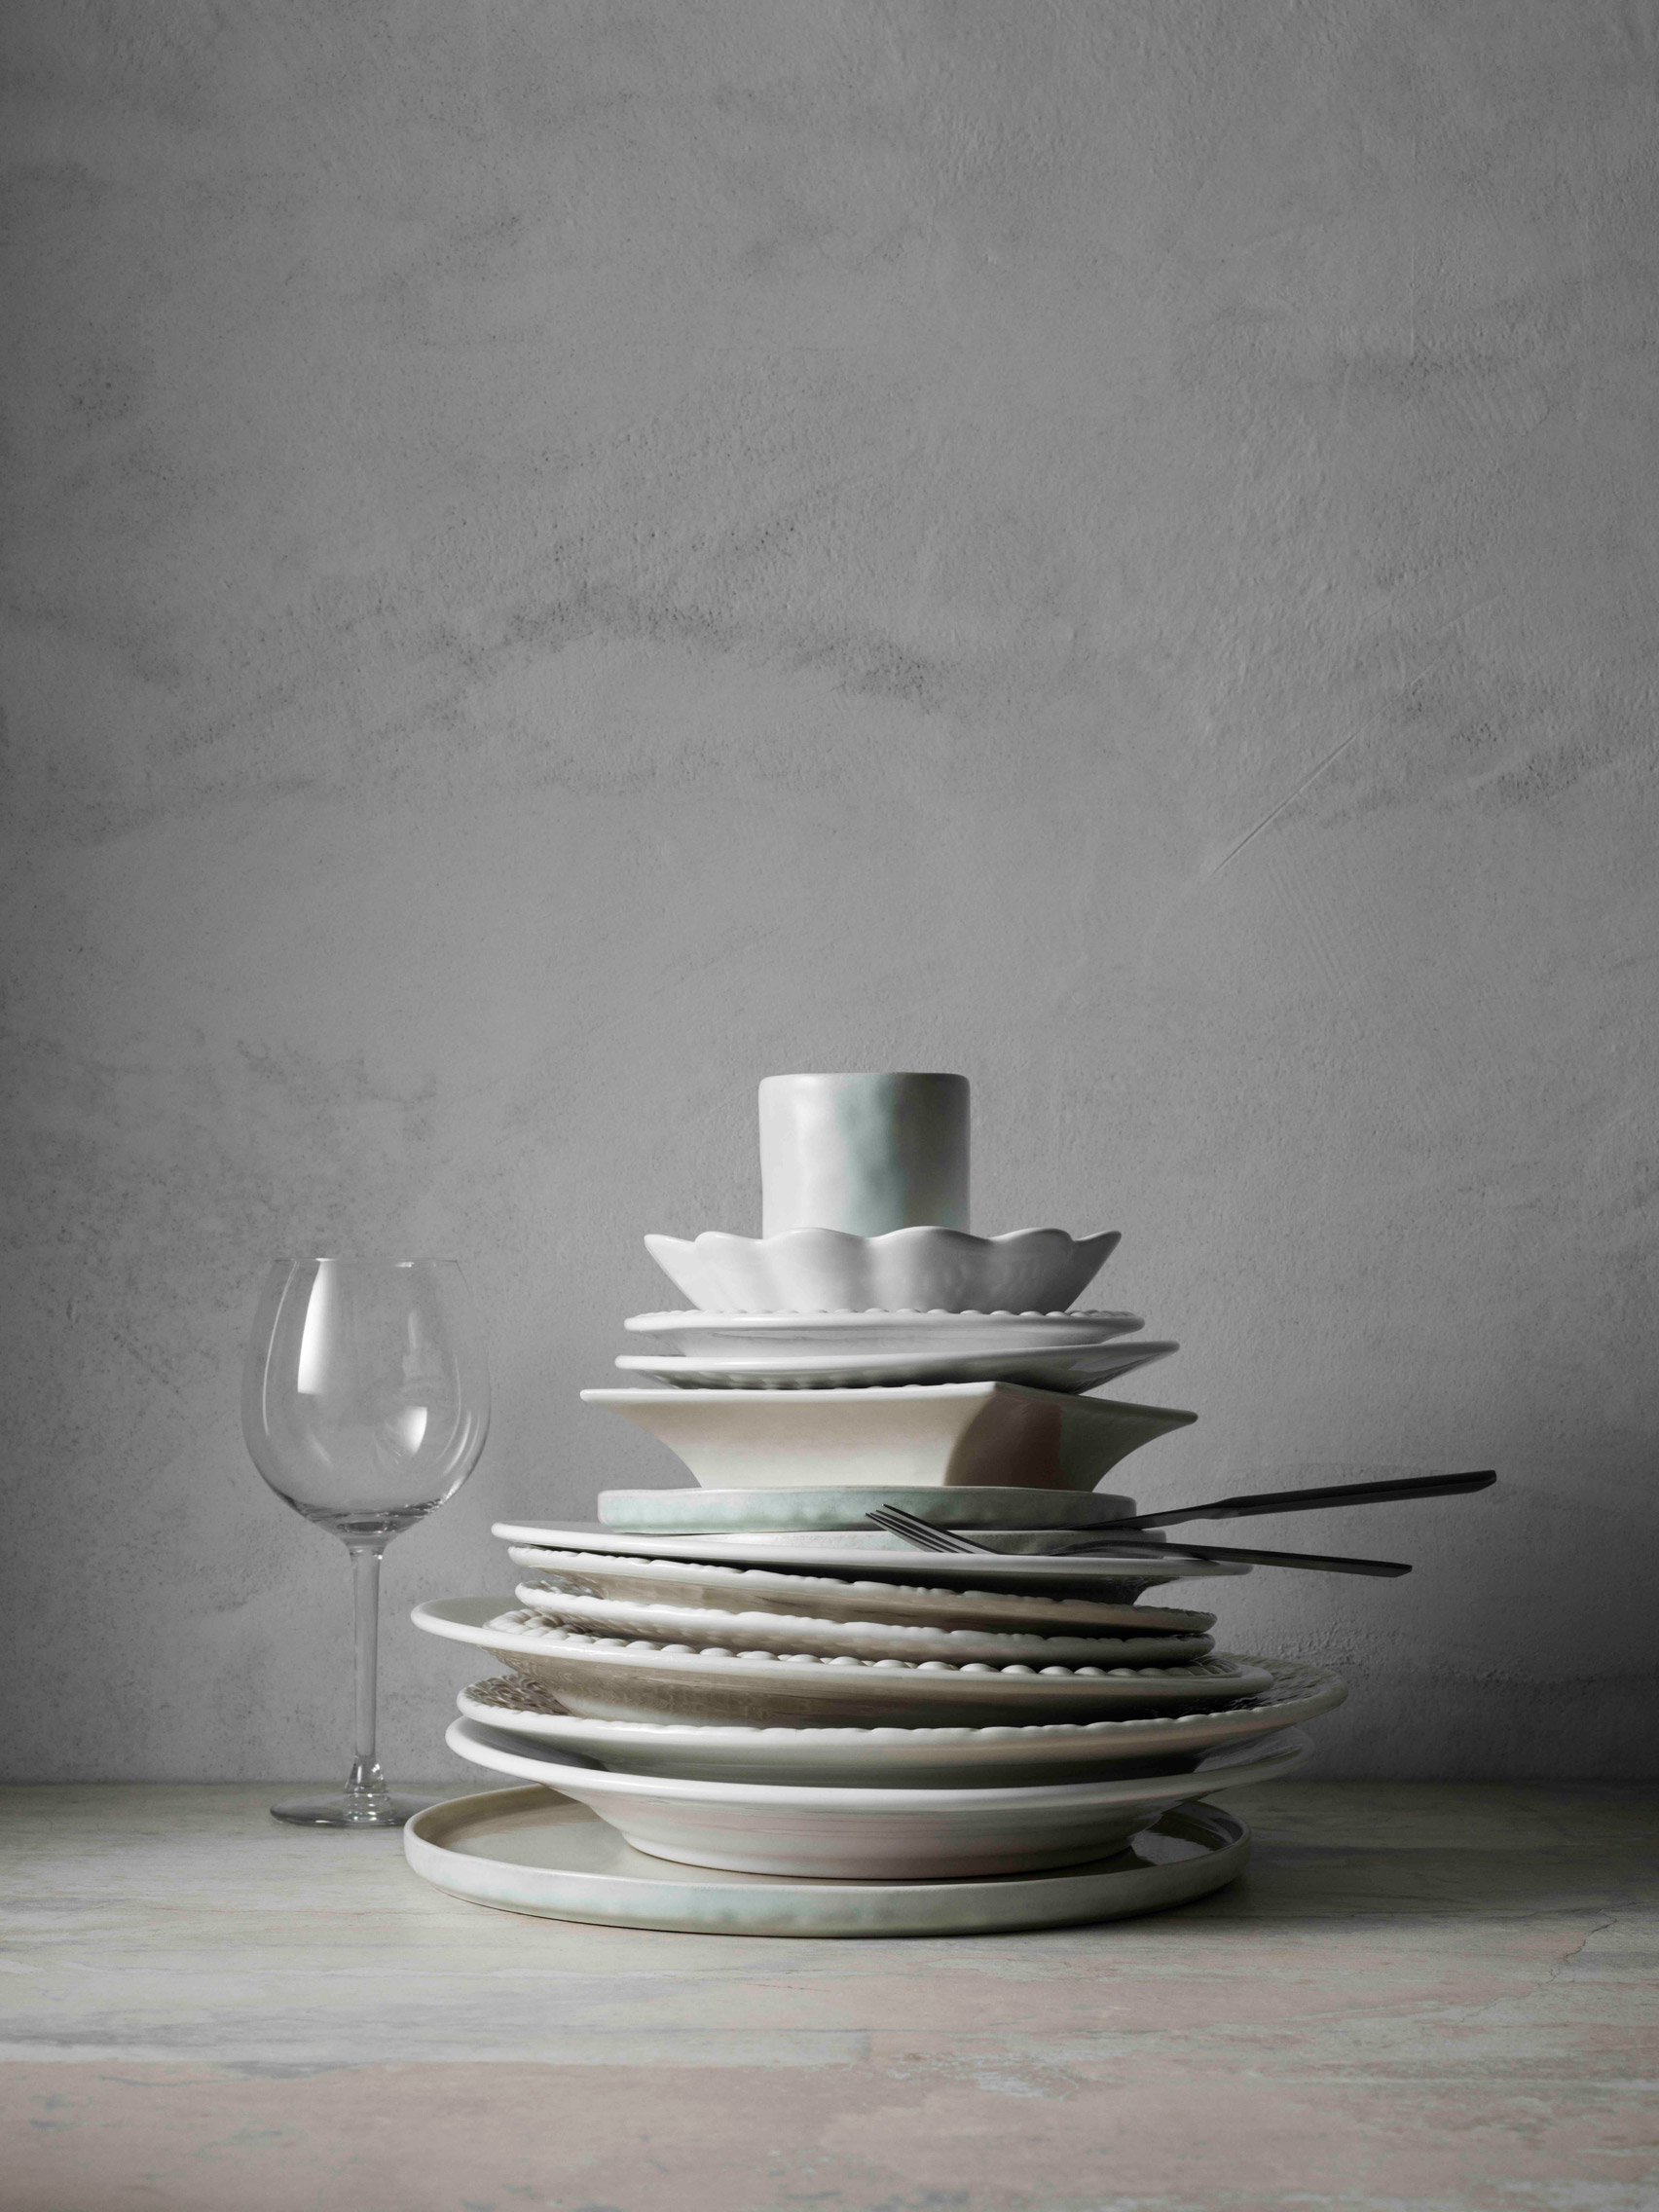 Ceramic collection by Sam Baron and Yatzer for Mateus